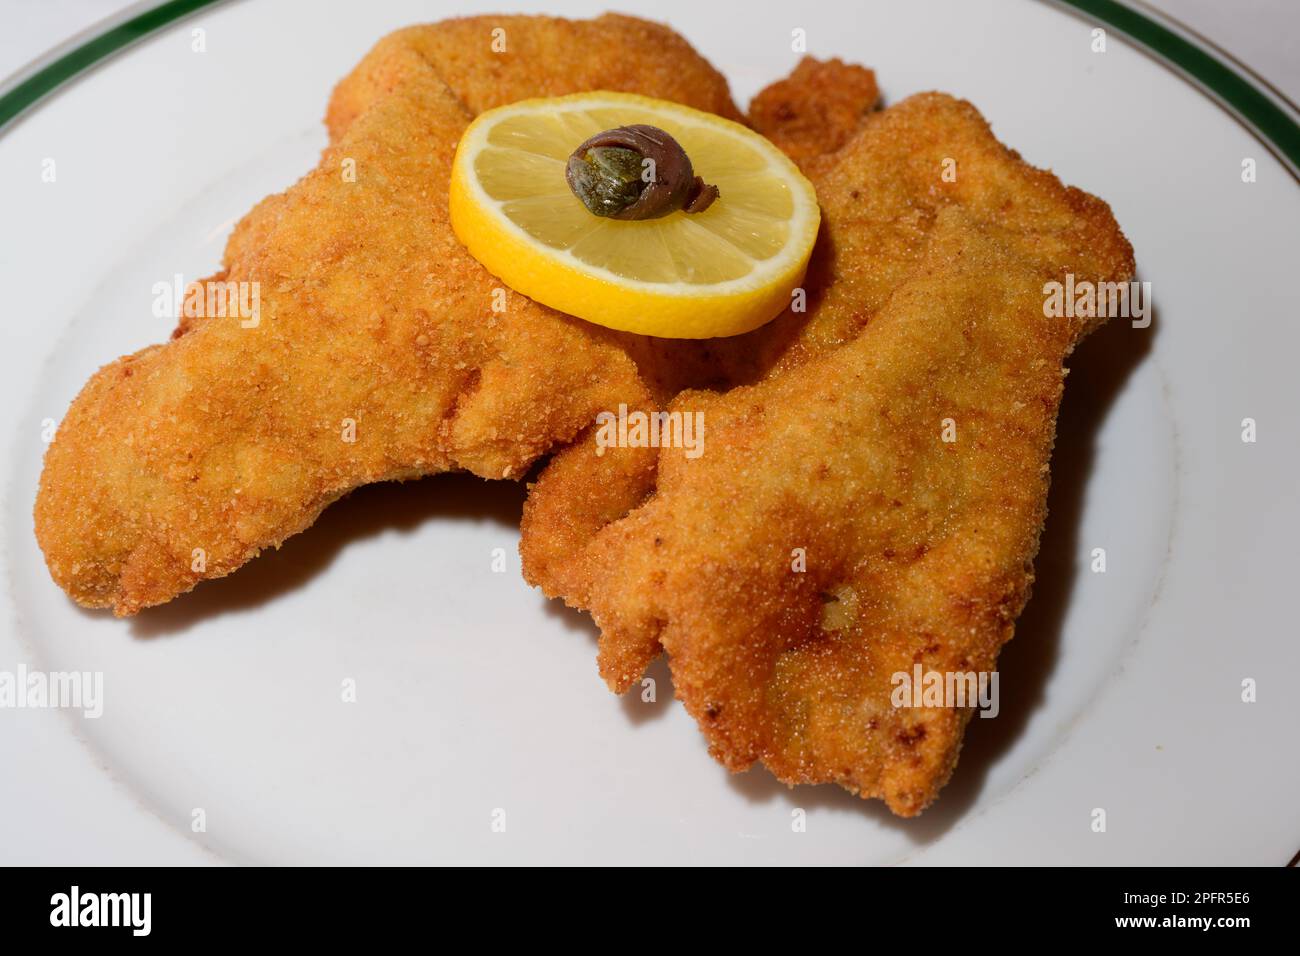 Wiener Schnitzel Breaded Fried Veal Cutlet with Viennese Garnish or Wiener Garnitur consisting of a Lemon Wheel and an Anchovy Ring Stock Photo